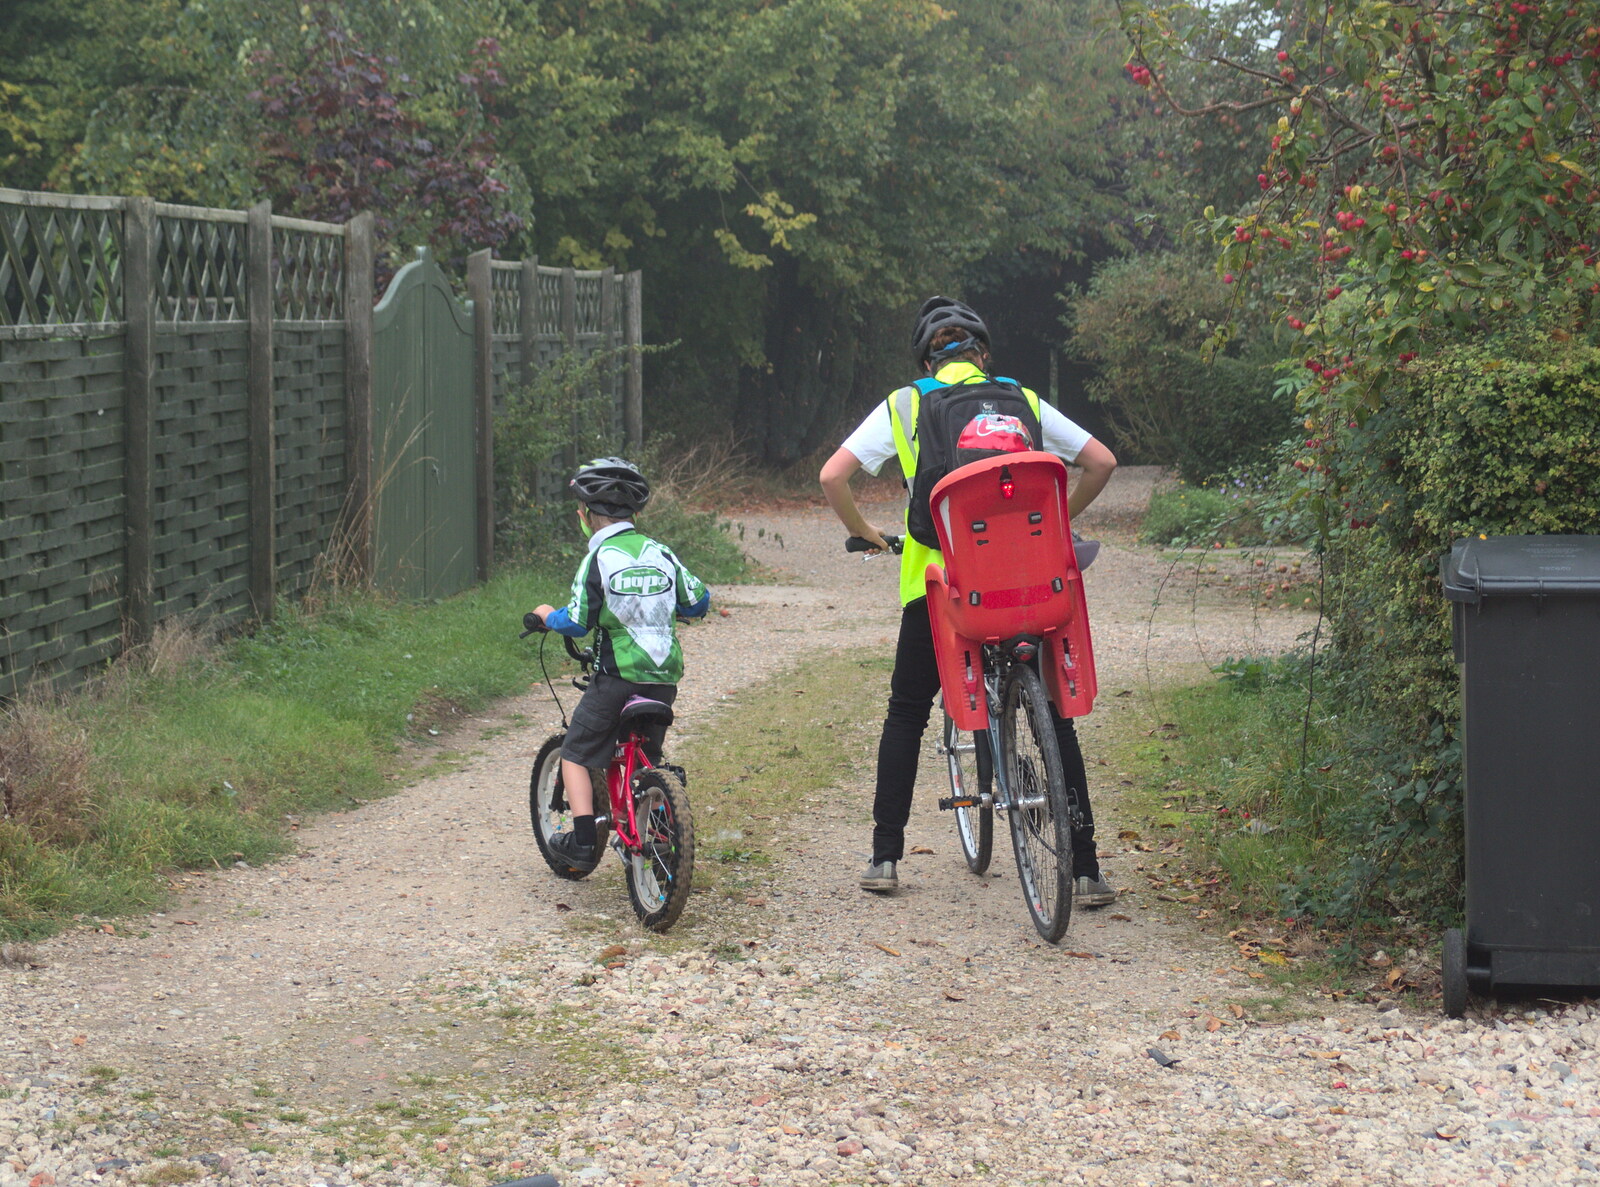 Fred and Isobel head off down the drive from Bike Rides and the BSCC at the Railway, Mellis and Brome, Suffolk - 18th September 2014